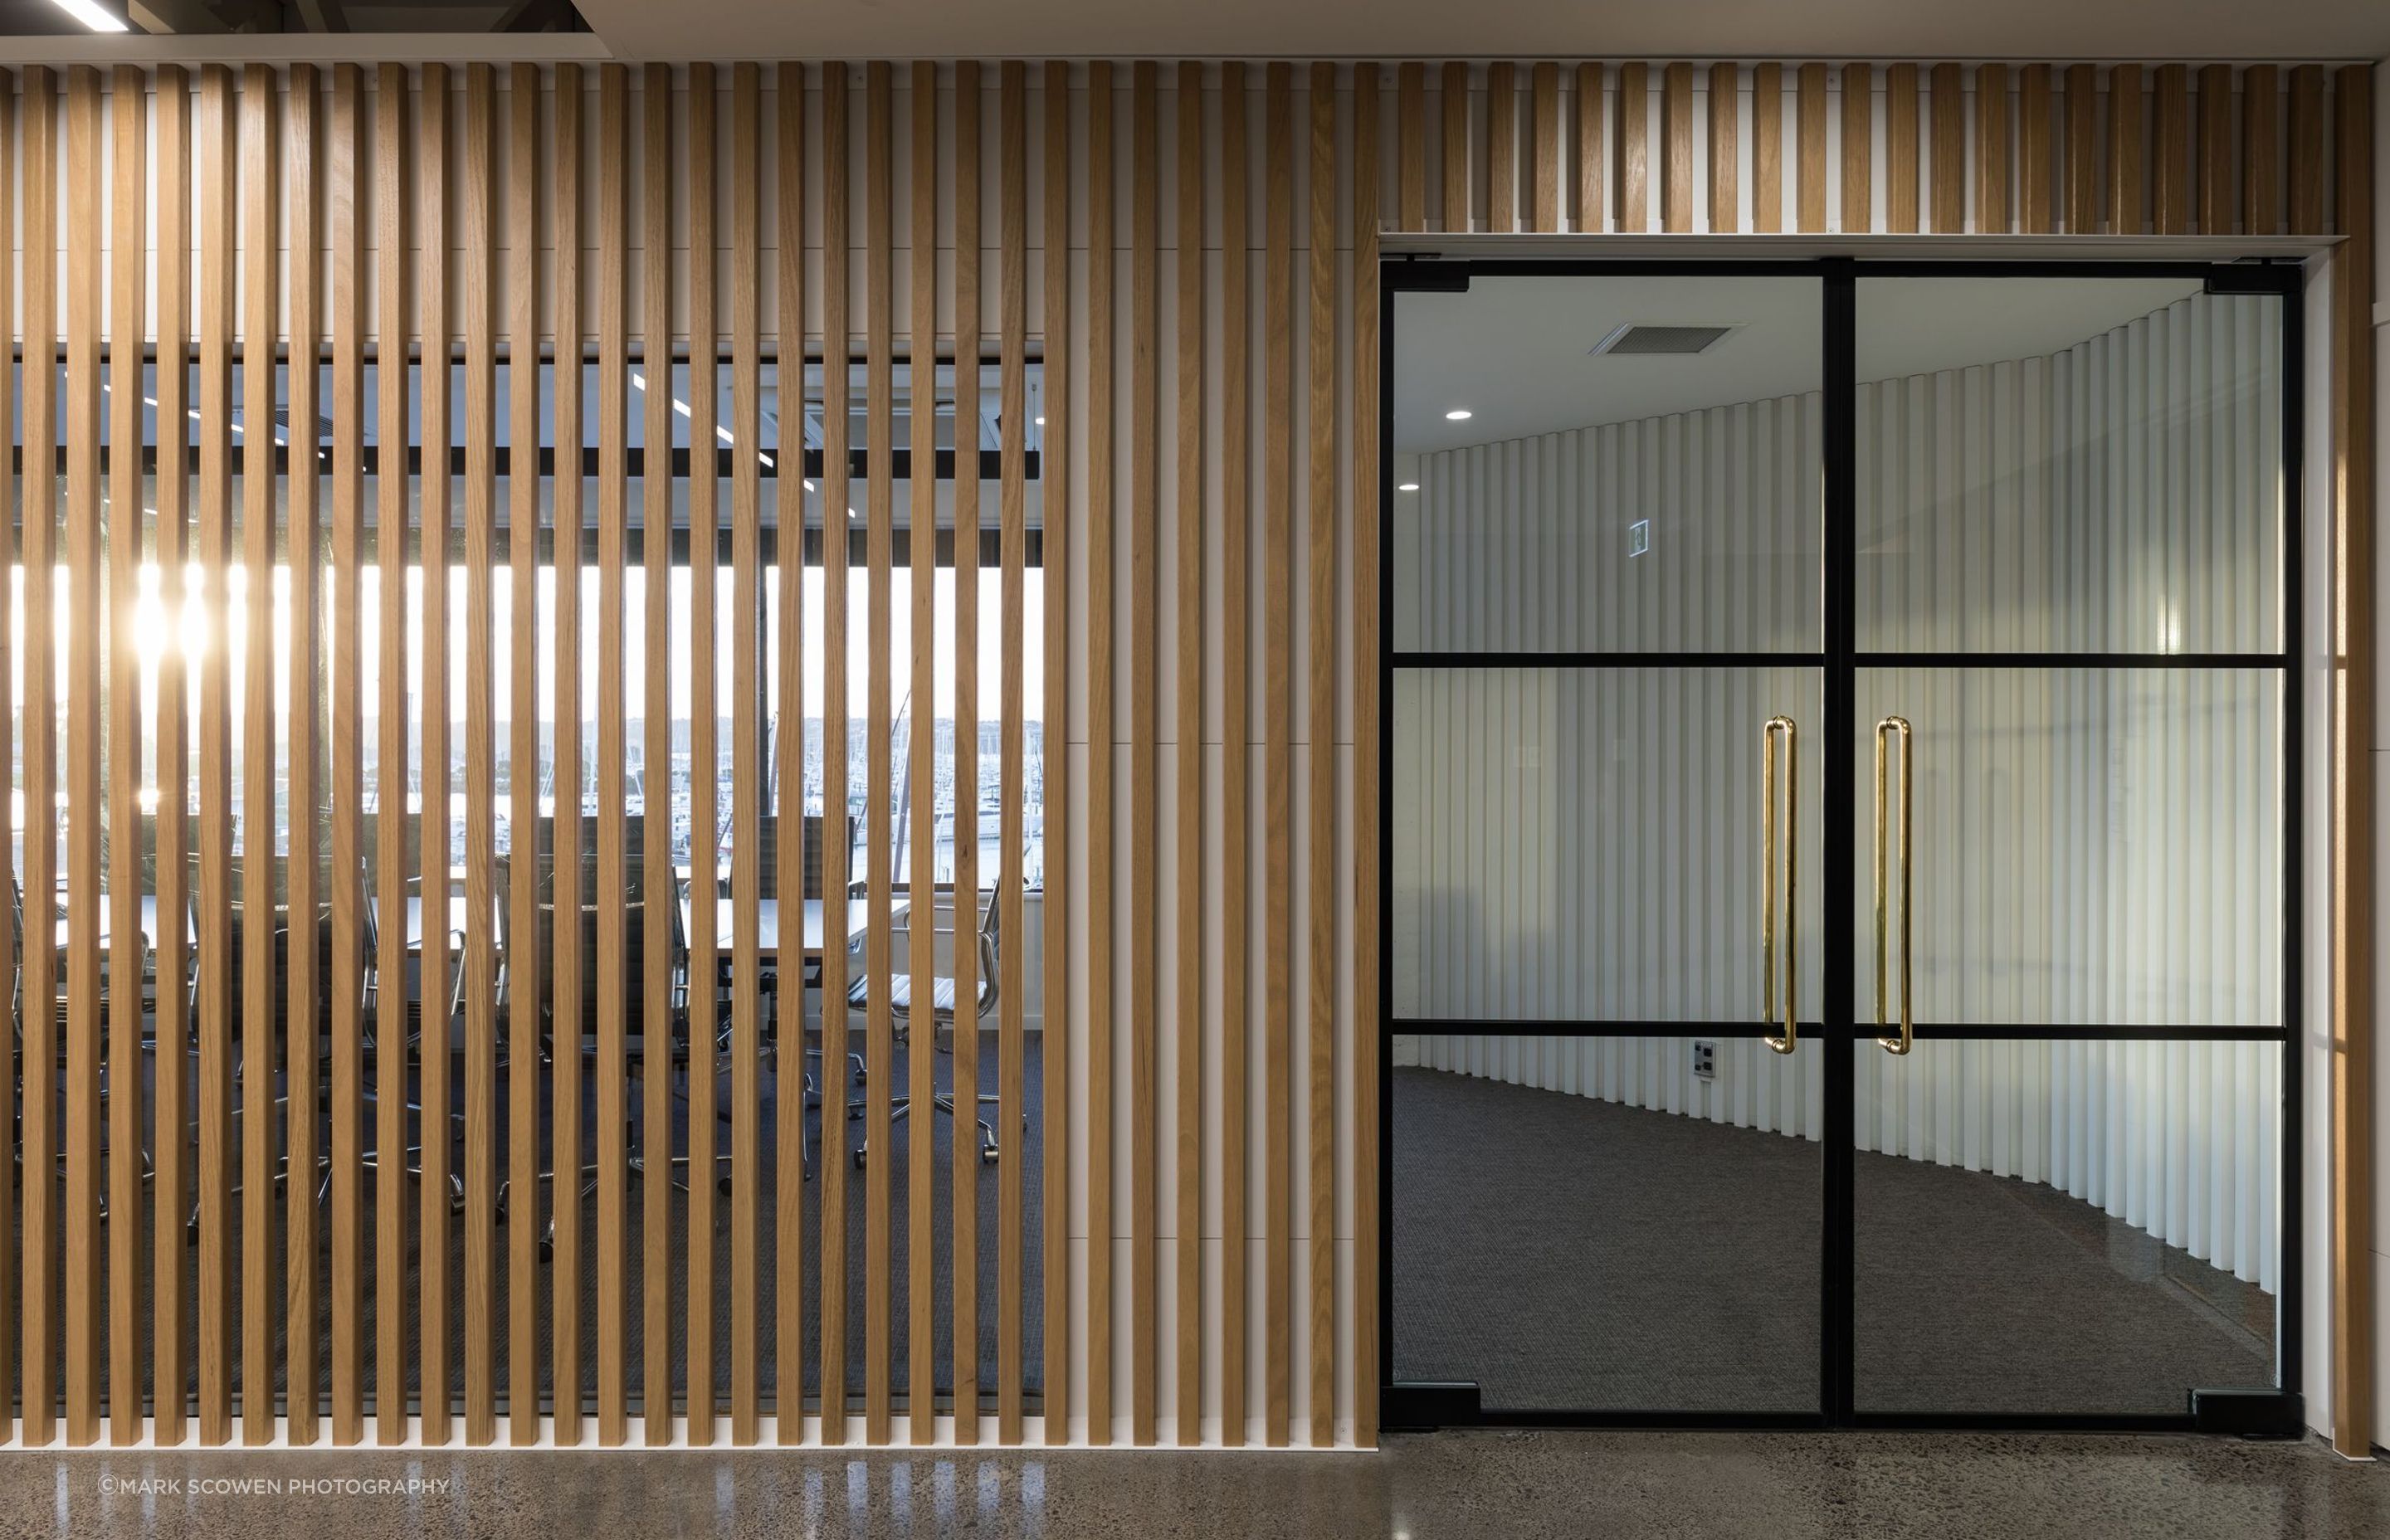 Specified by Cubicon Interiors for the JC Decaux offices, the HB2240 D-Pull is manufactured in solid brass and comes in three lengths—300mm, 600mm and 1200mm. The finish chosen for the JC Decaux fit-out was unlacquered polished brass.